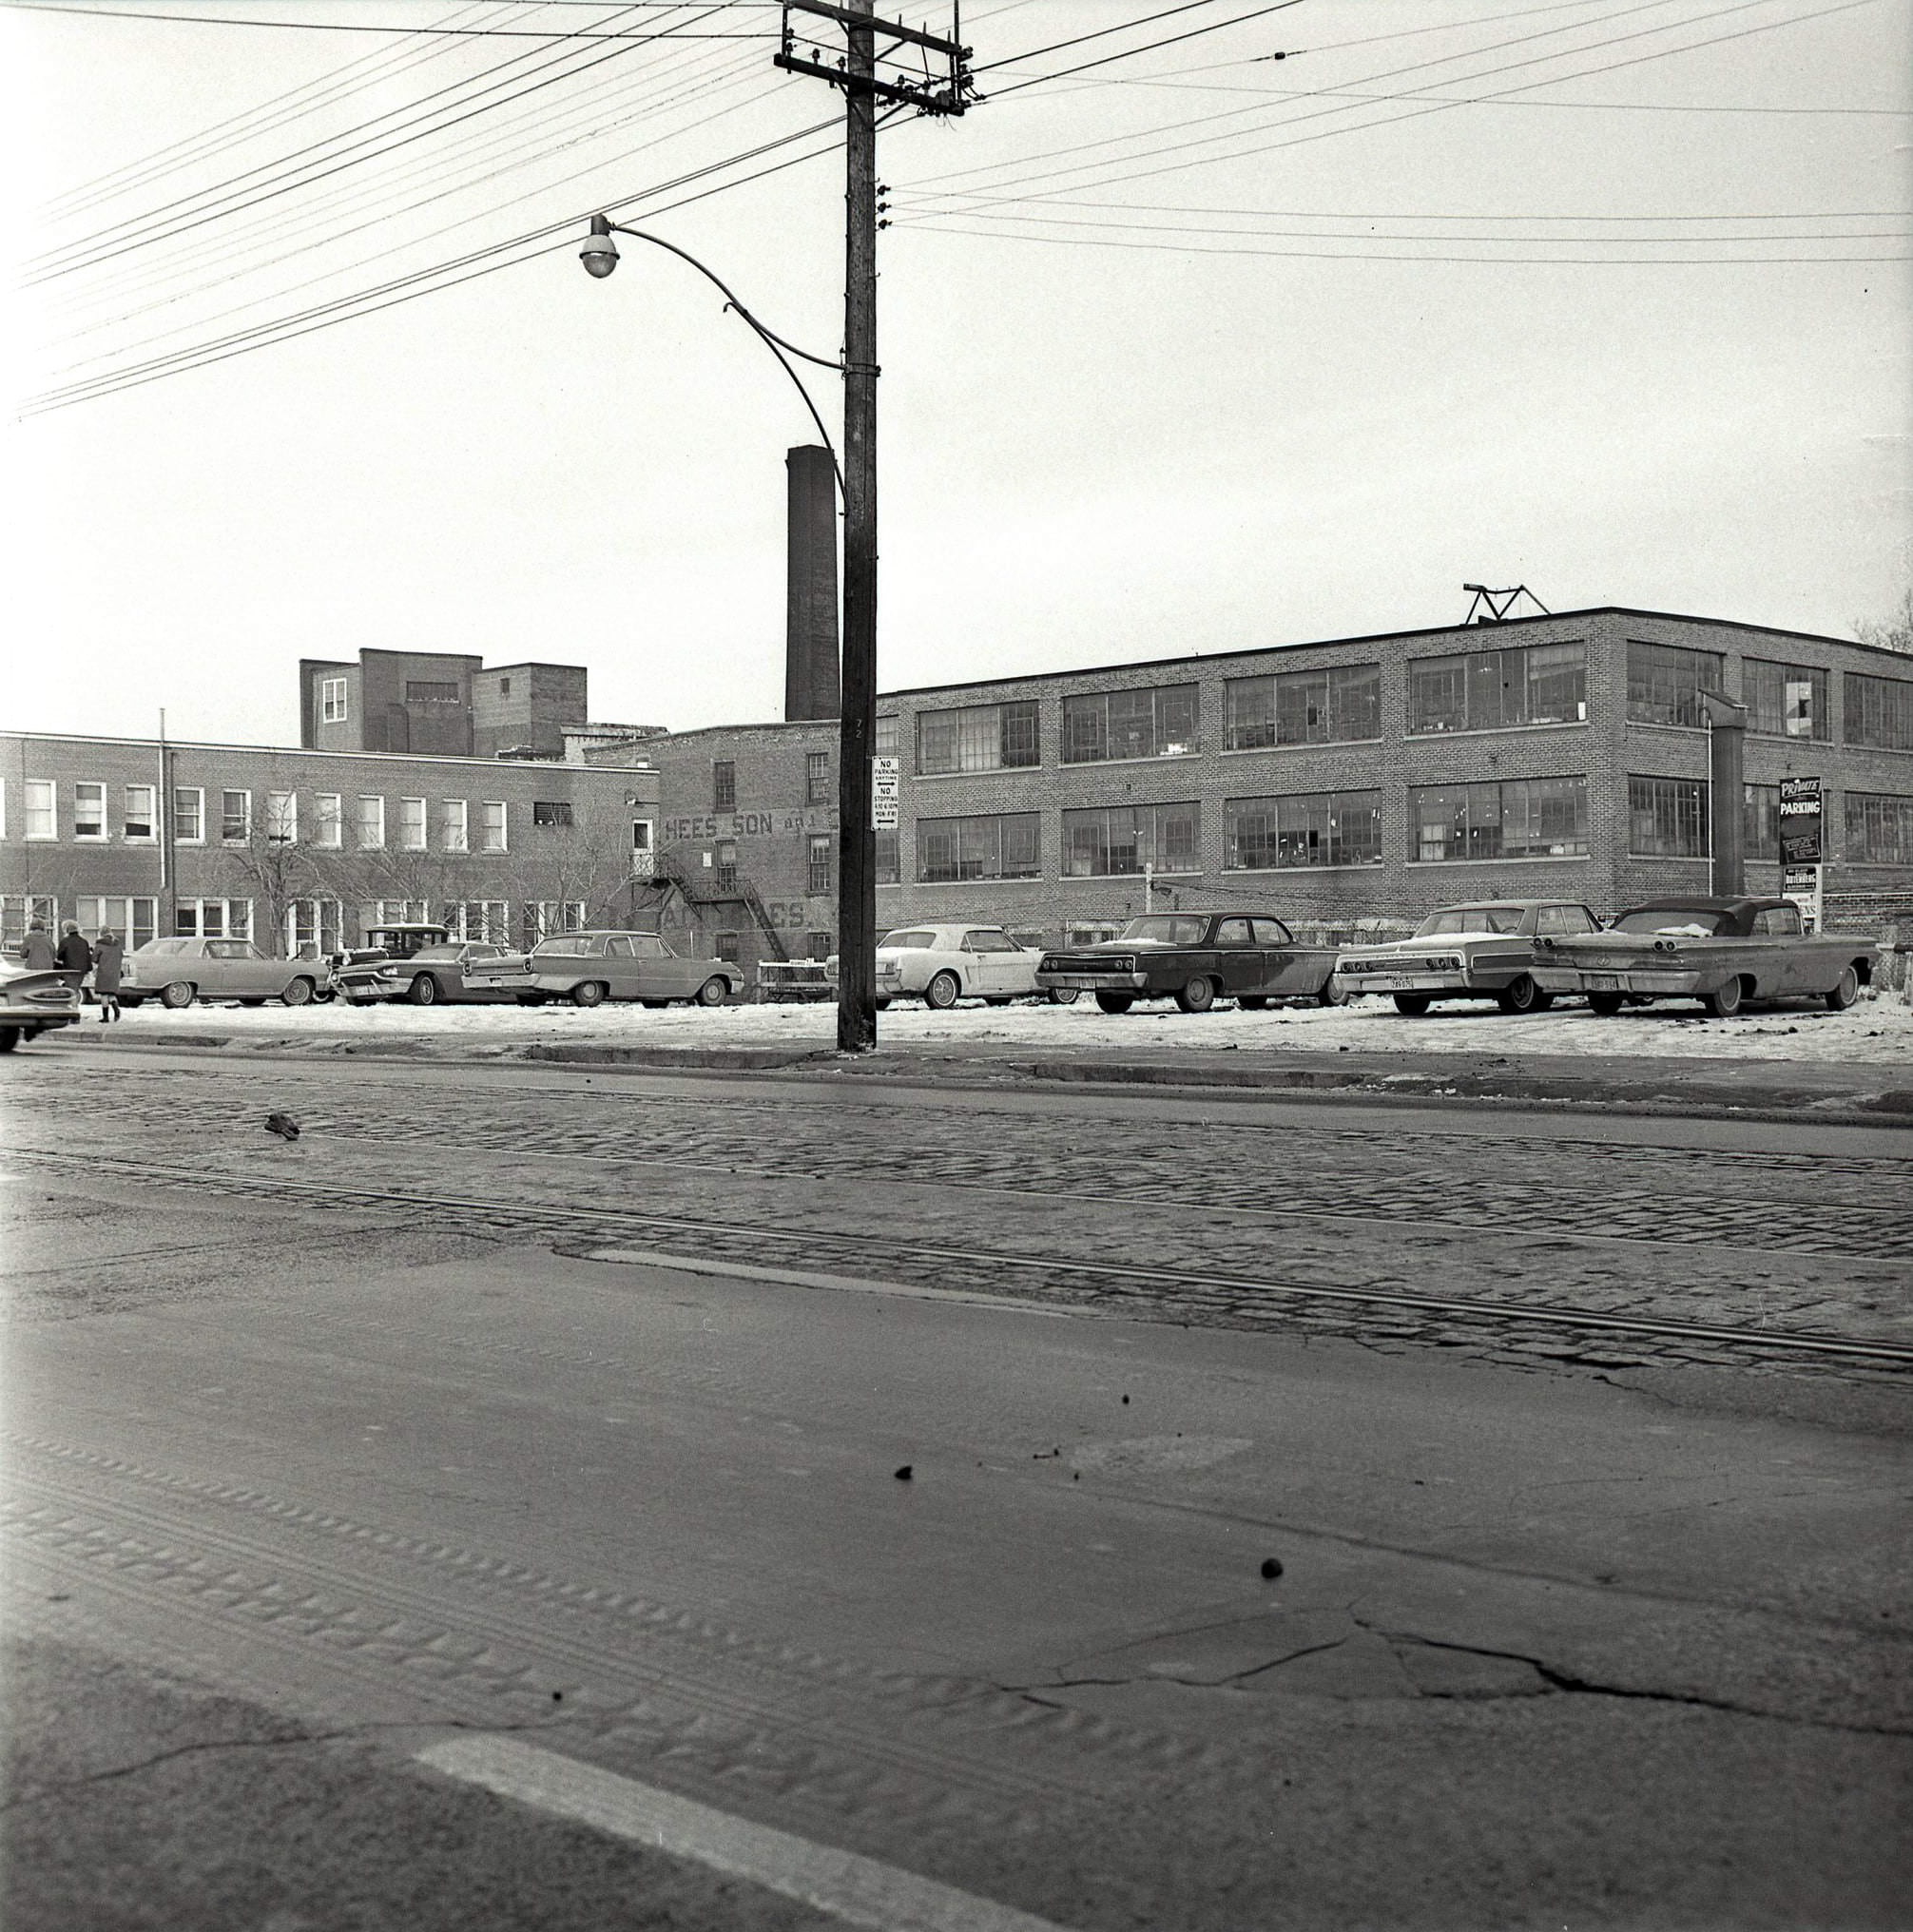 North side of Davenport Rd., between Bedford Rd. and Avenue Rd., looking nw towards Bedford, 1964.